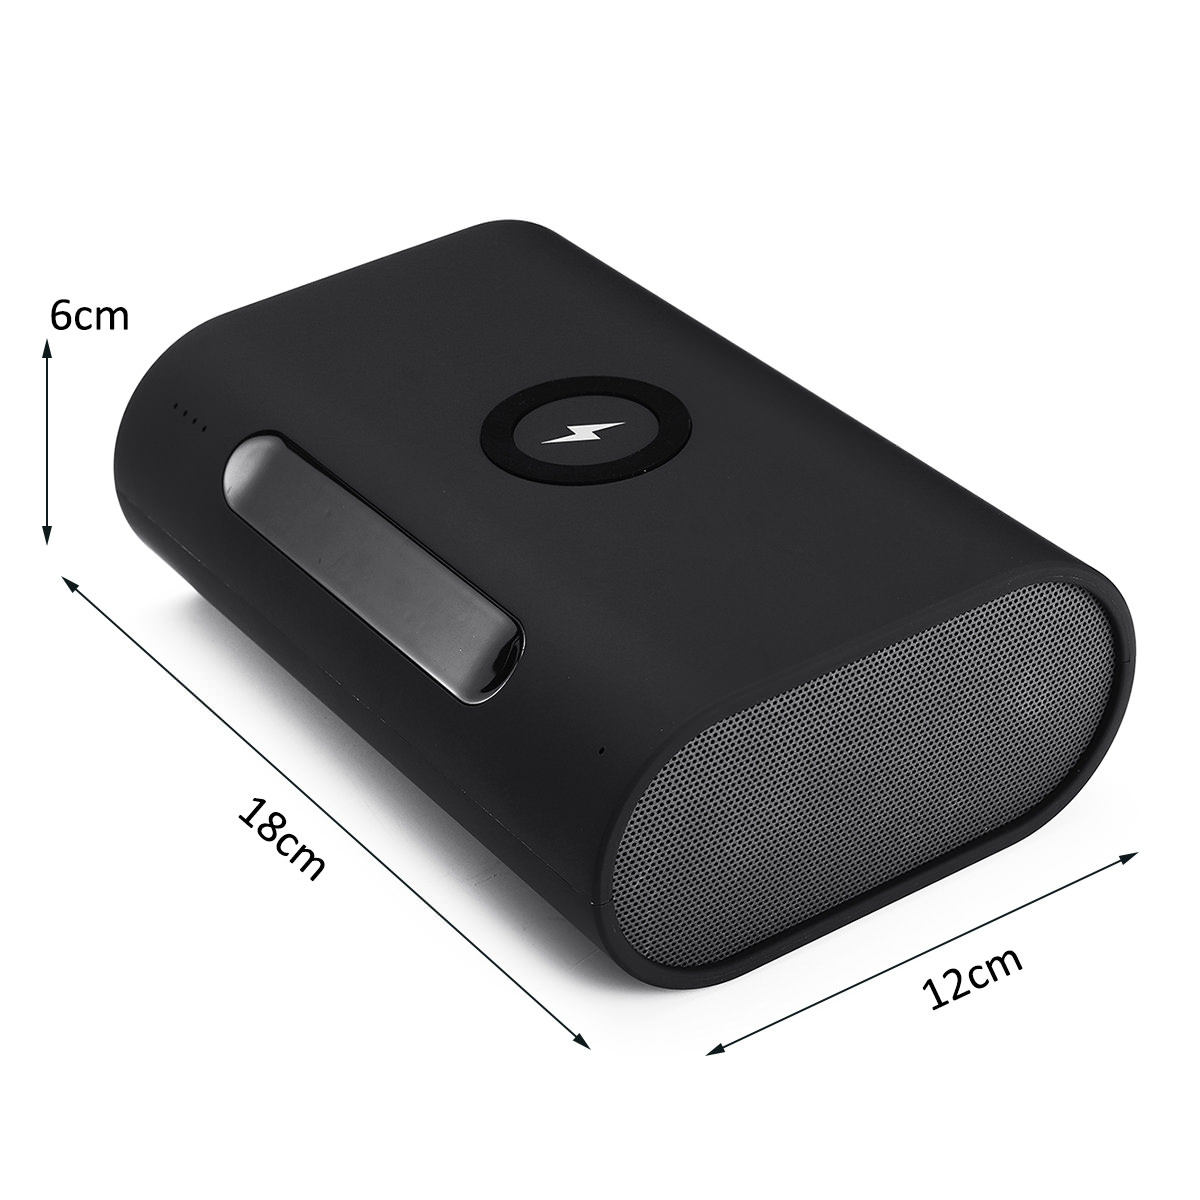 price 3 in 1 portable wireless charger/bluetooth speaker/power bank